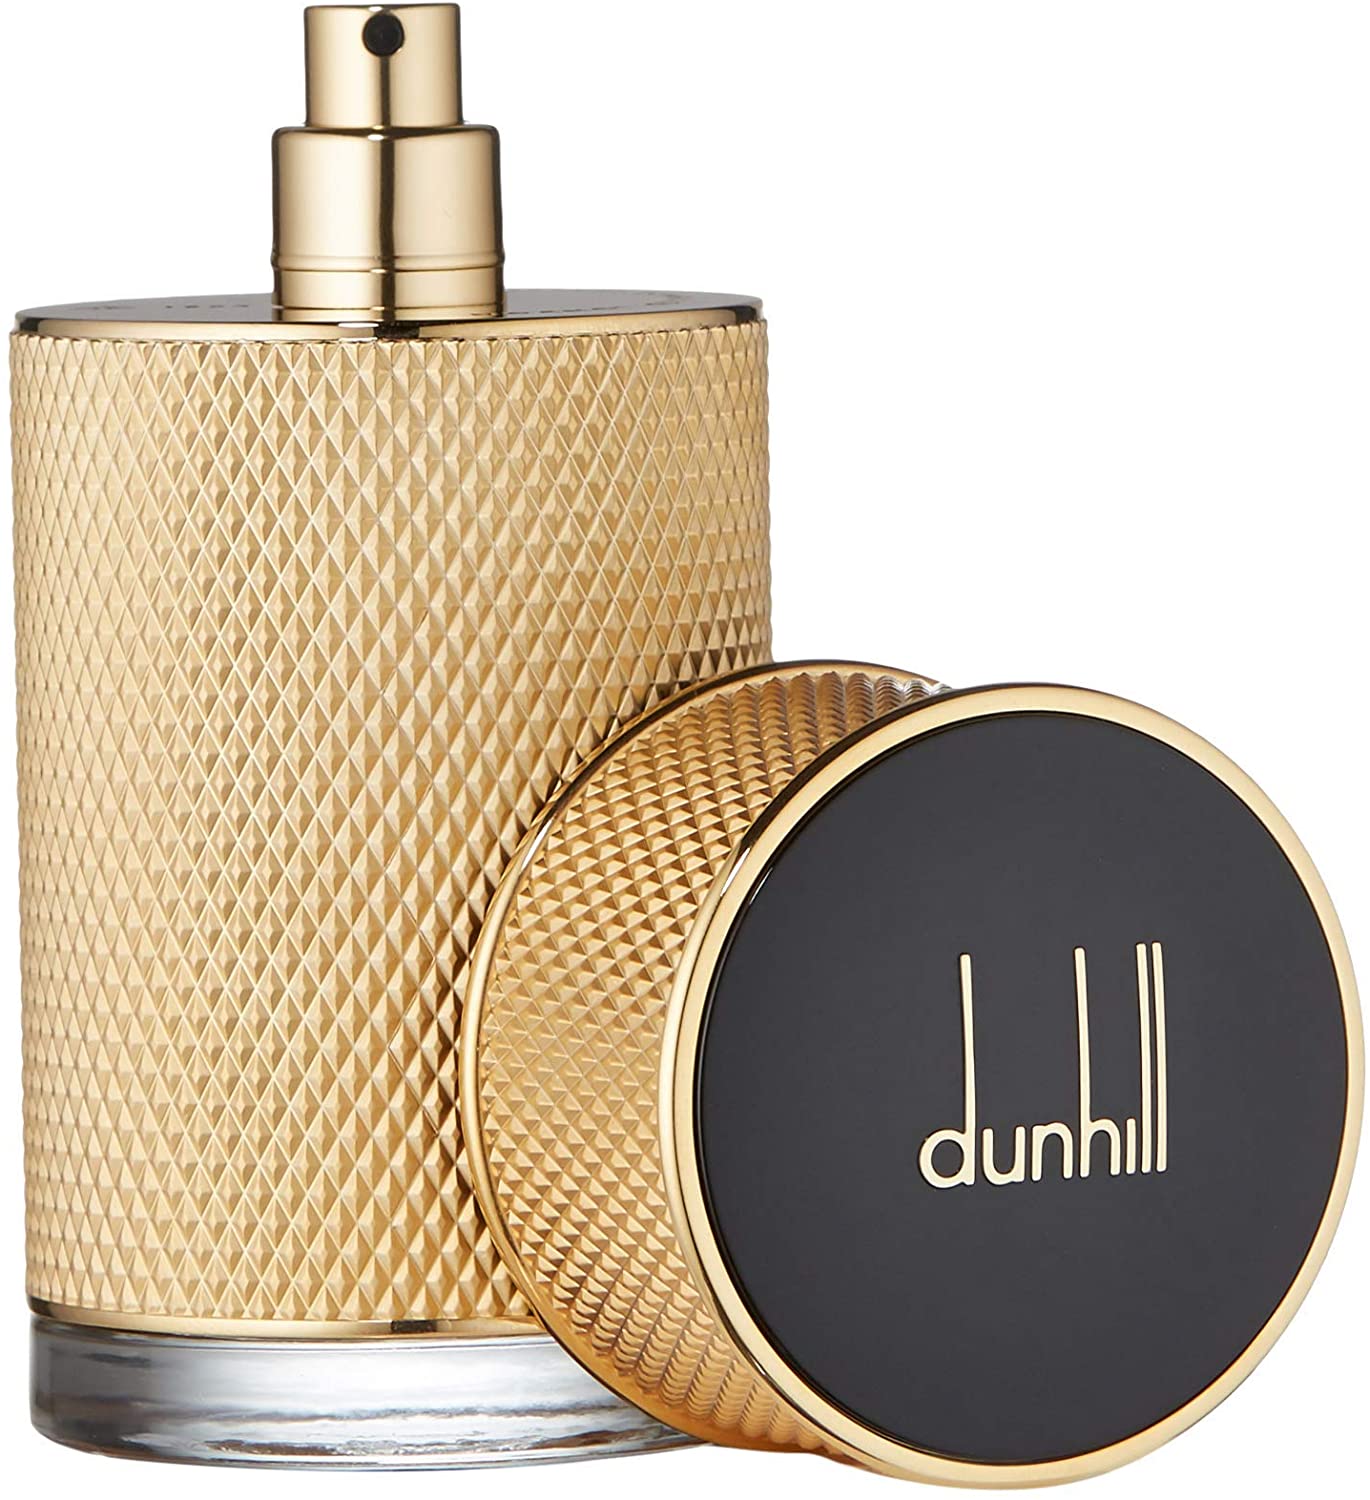 Dunhill Icon Absolute EDP for Men 100ml Minoustore